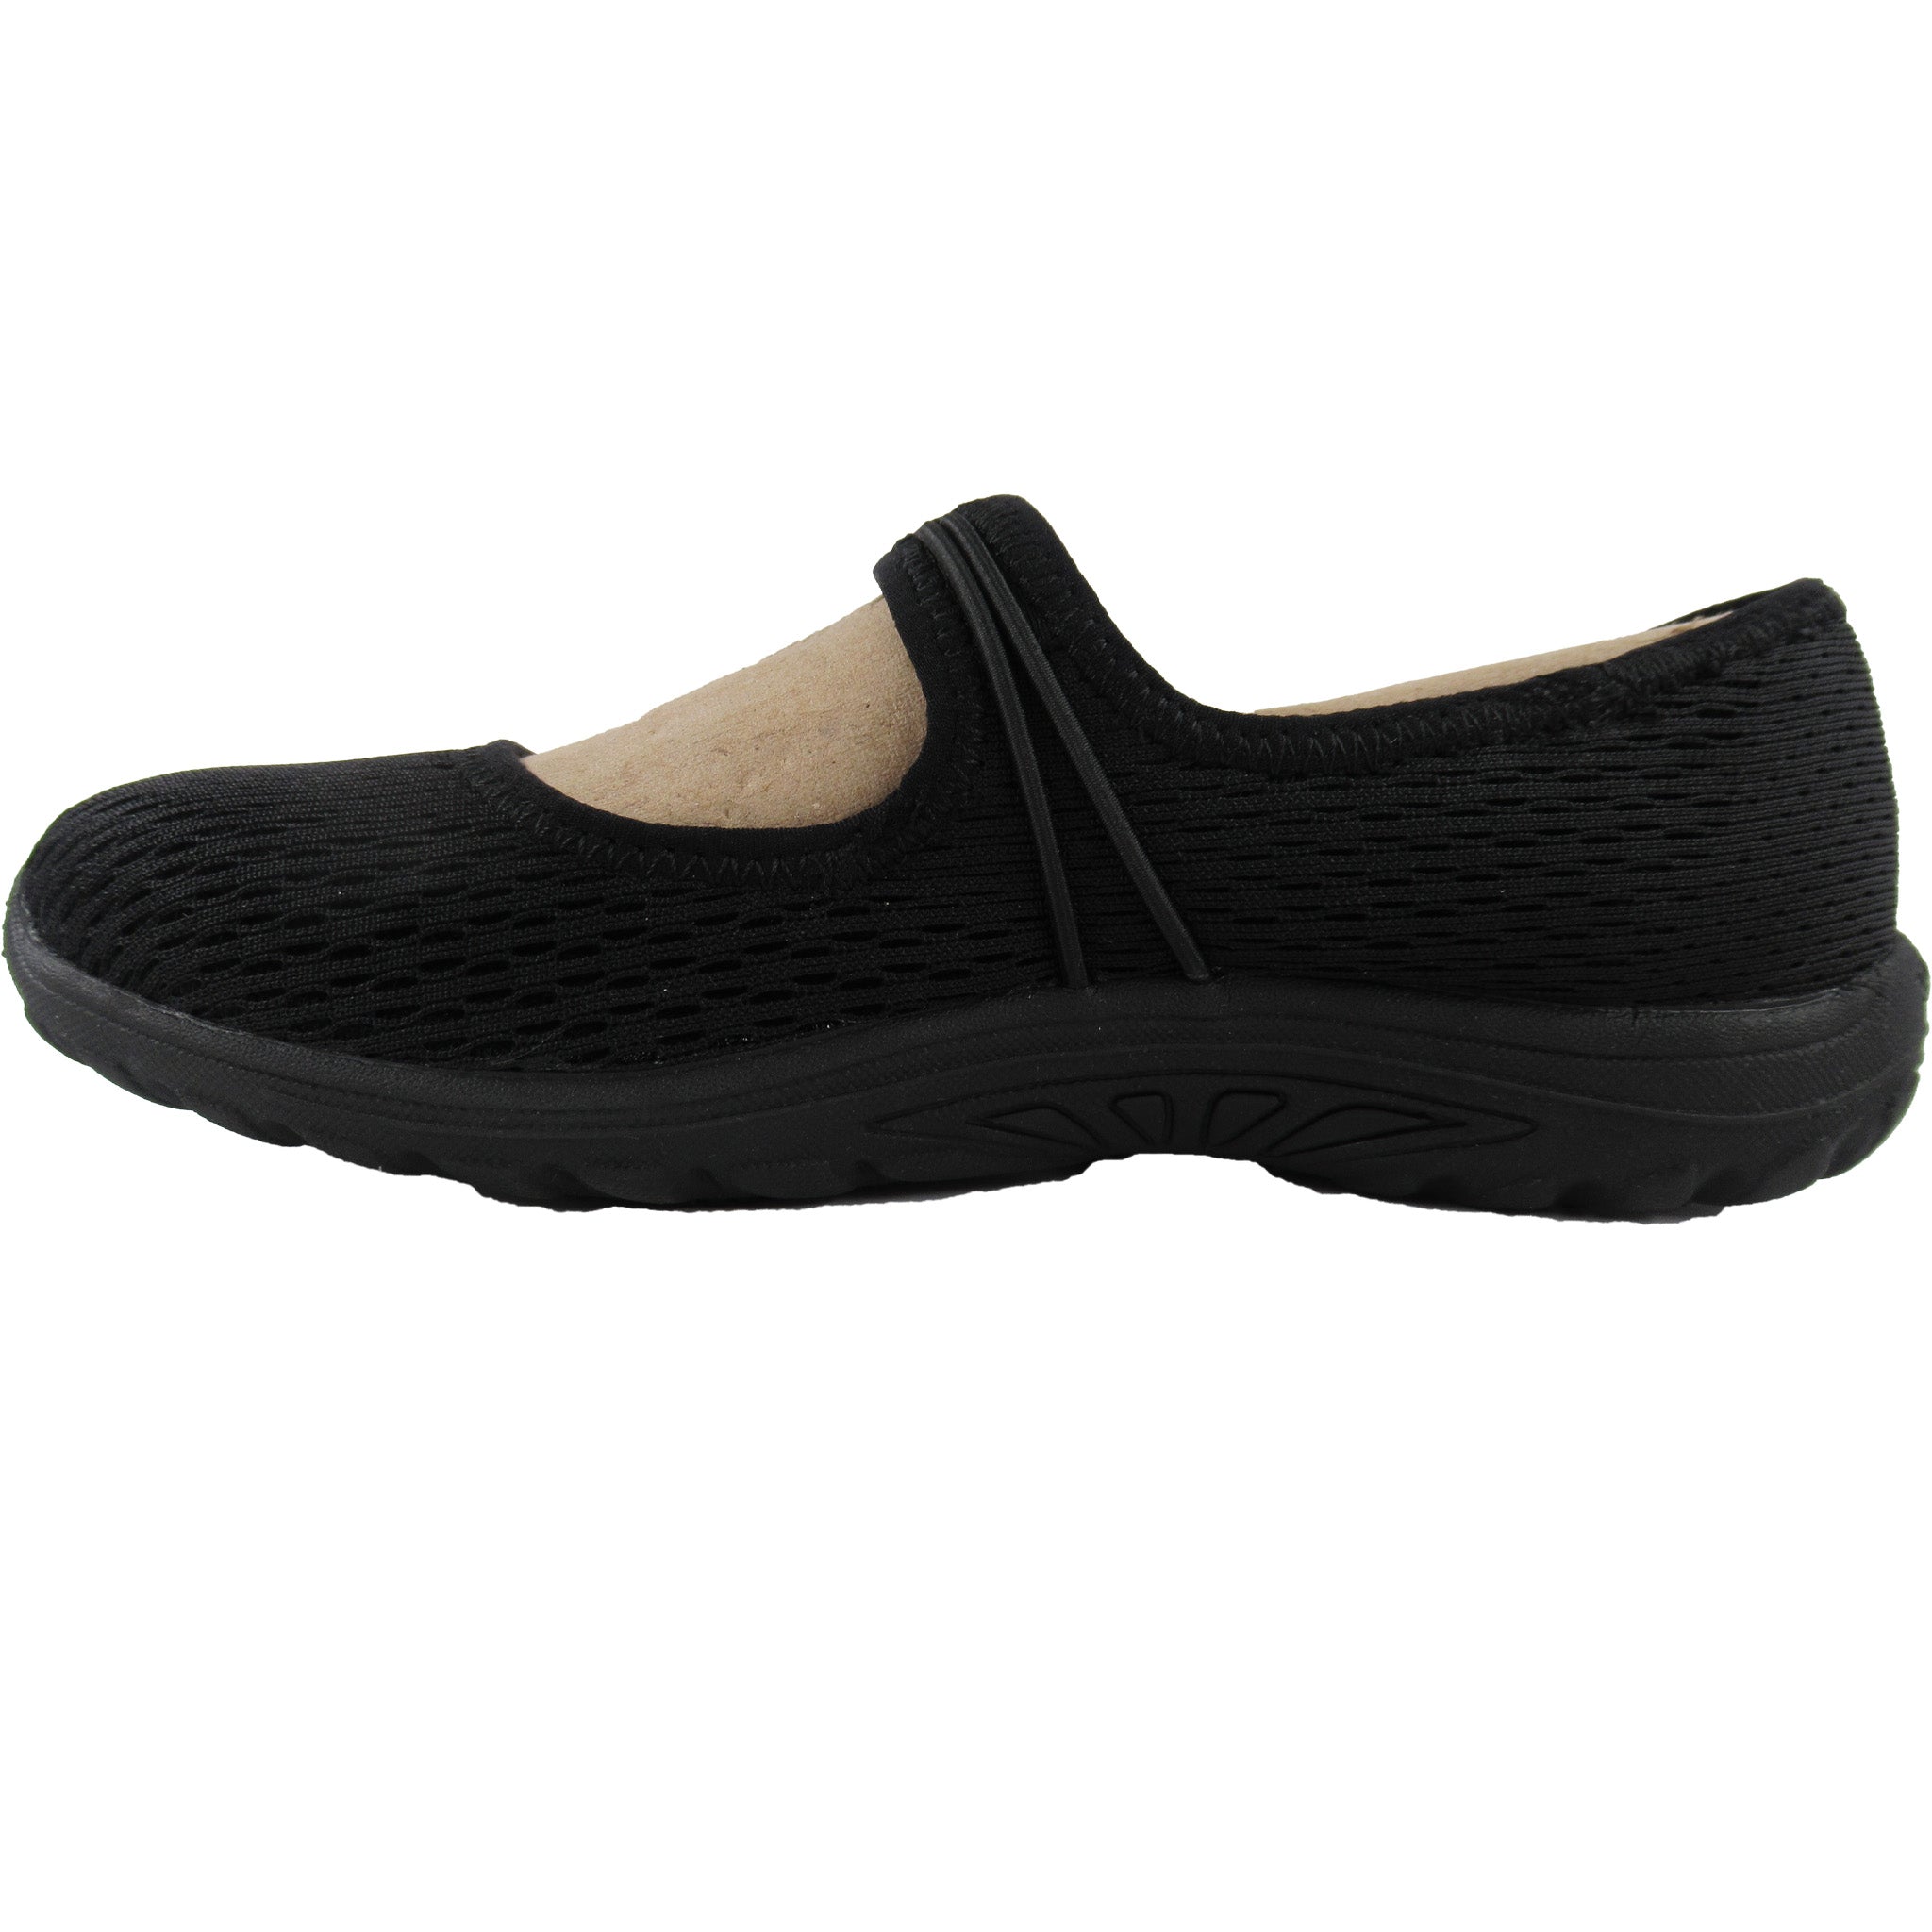 skechers woven mary janes